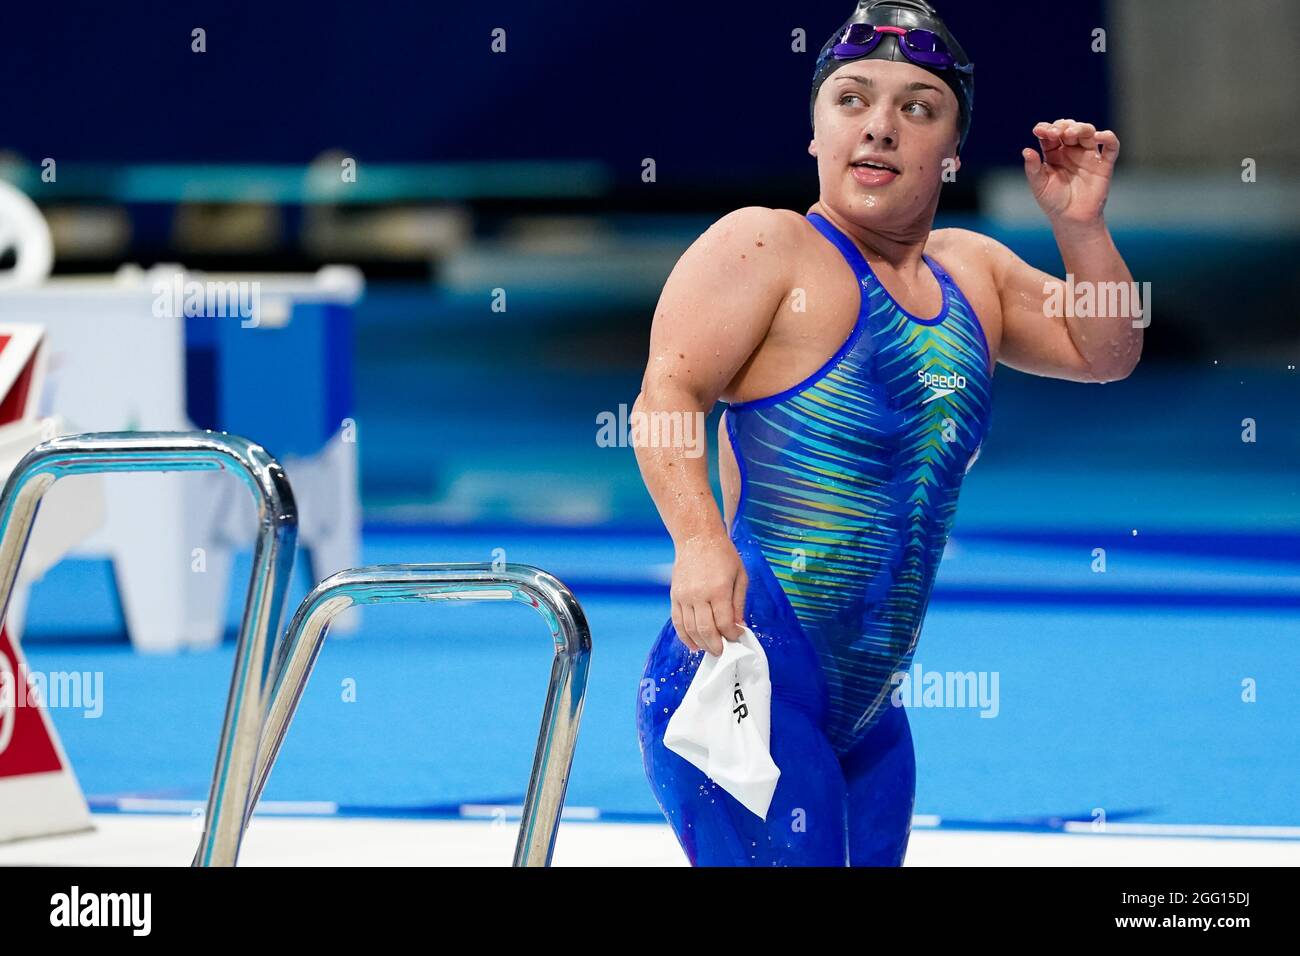 TOKYO, JAPAN - AUGUST 28: Nicole Turner of Ireland after competing in the Women's 100m Breaststroke SB6 Heats during the Tokyo 2020 Paralympic Games at Tokyo Aquatics Centre on August 28, 2021 in Tokyo, Japan (Photo by Ilse Schaffers/Orange Pictures) NOCNSF Stock Photo